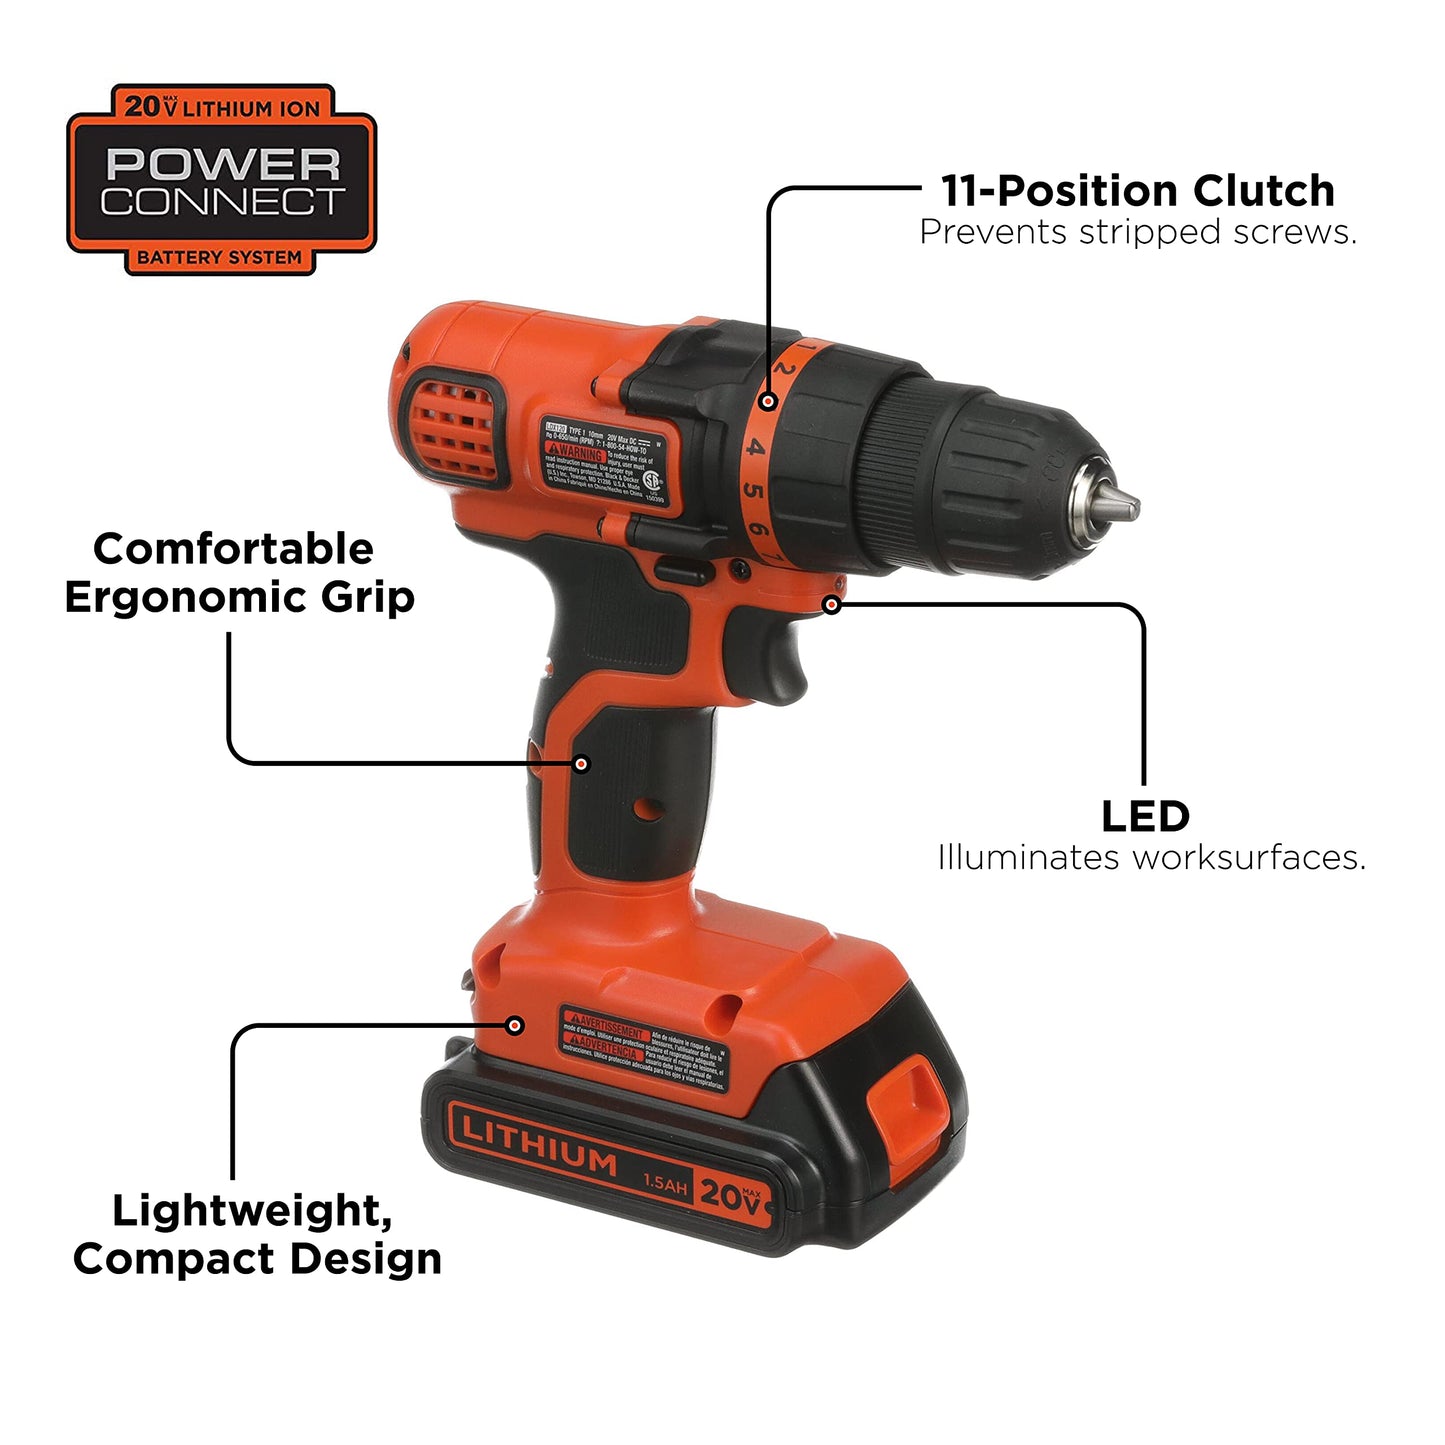 BLACK+DECKER 20V MAX Cordless Drill and Driver, 3/8 Inch, With LED Work Light, Battery and Charger Included (LDX120C)